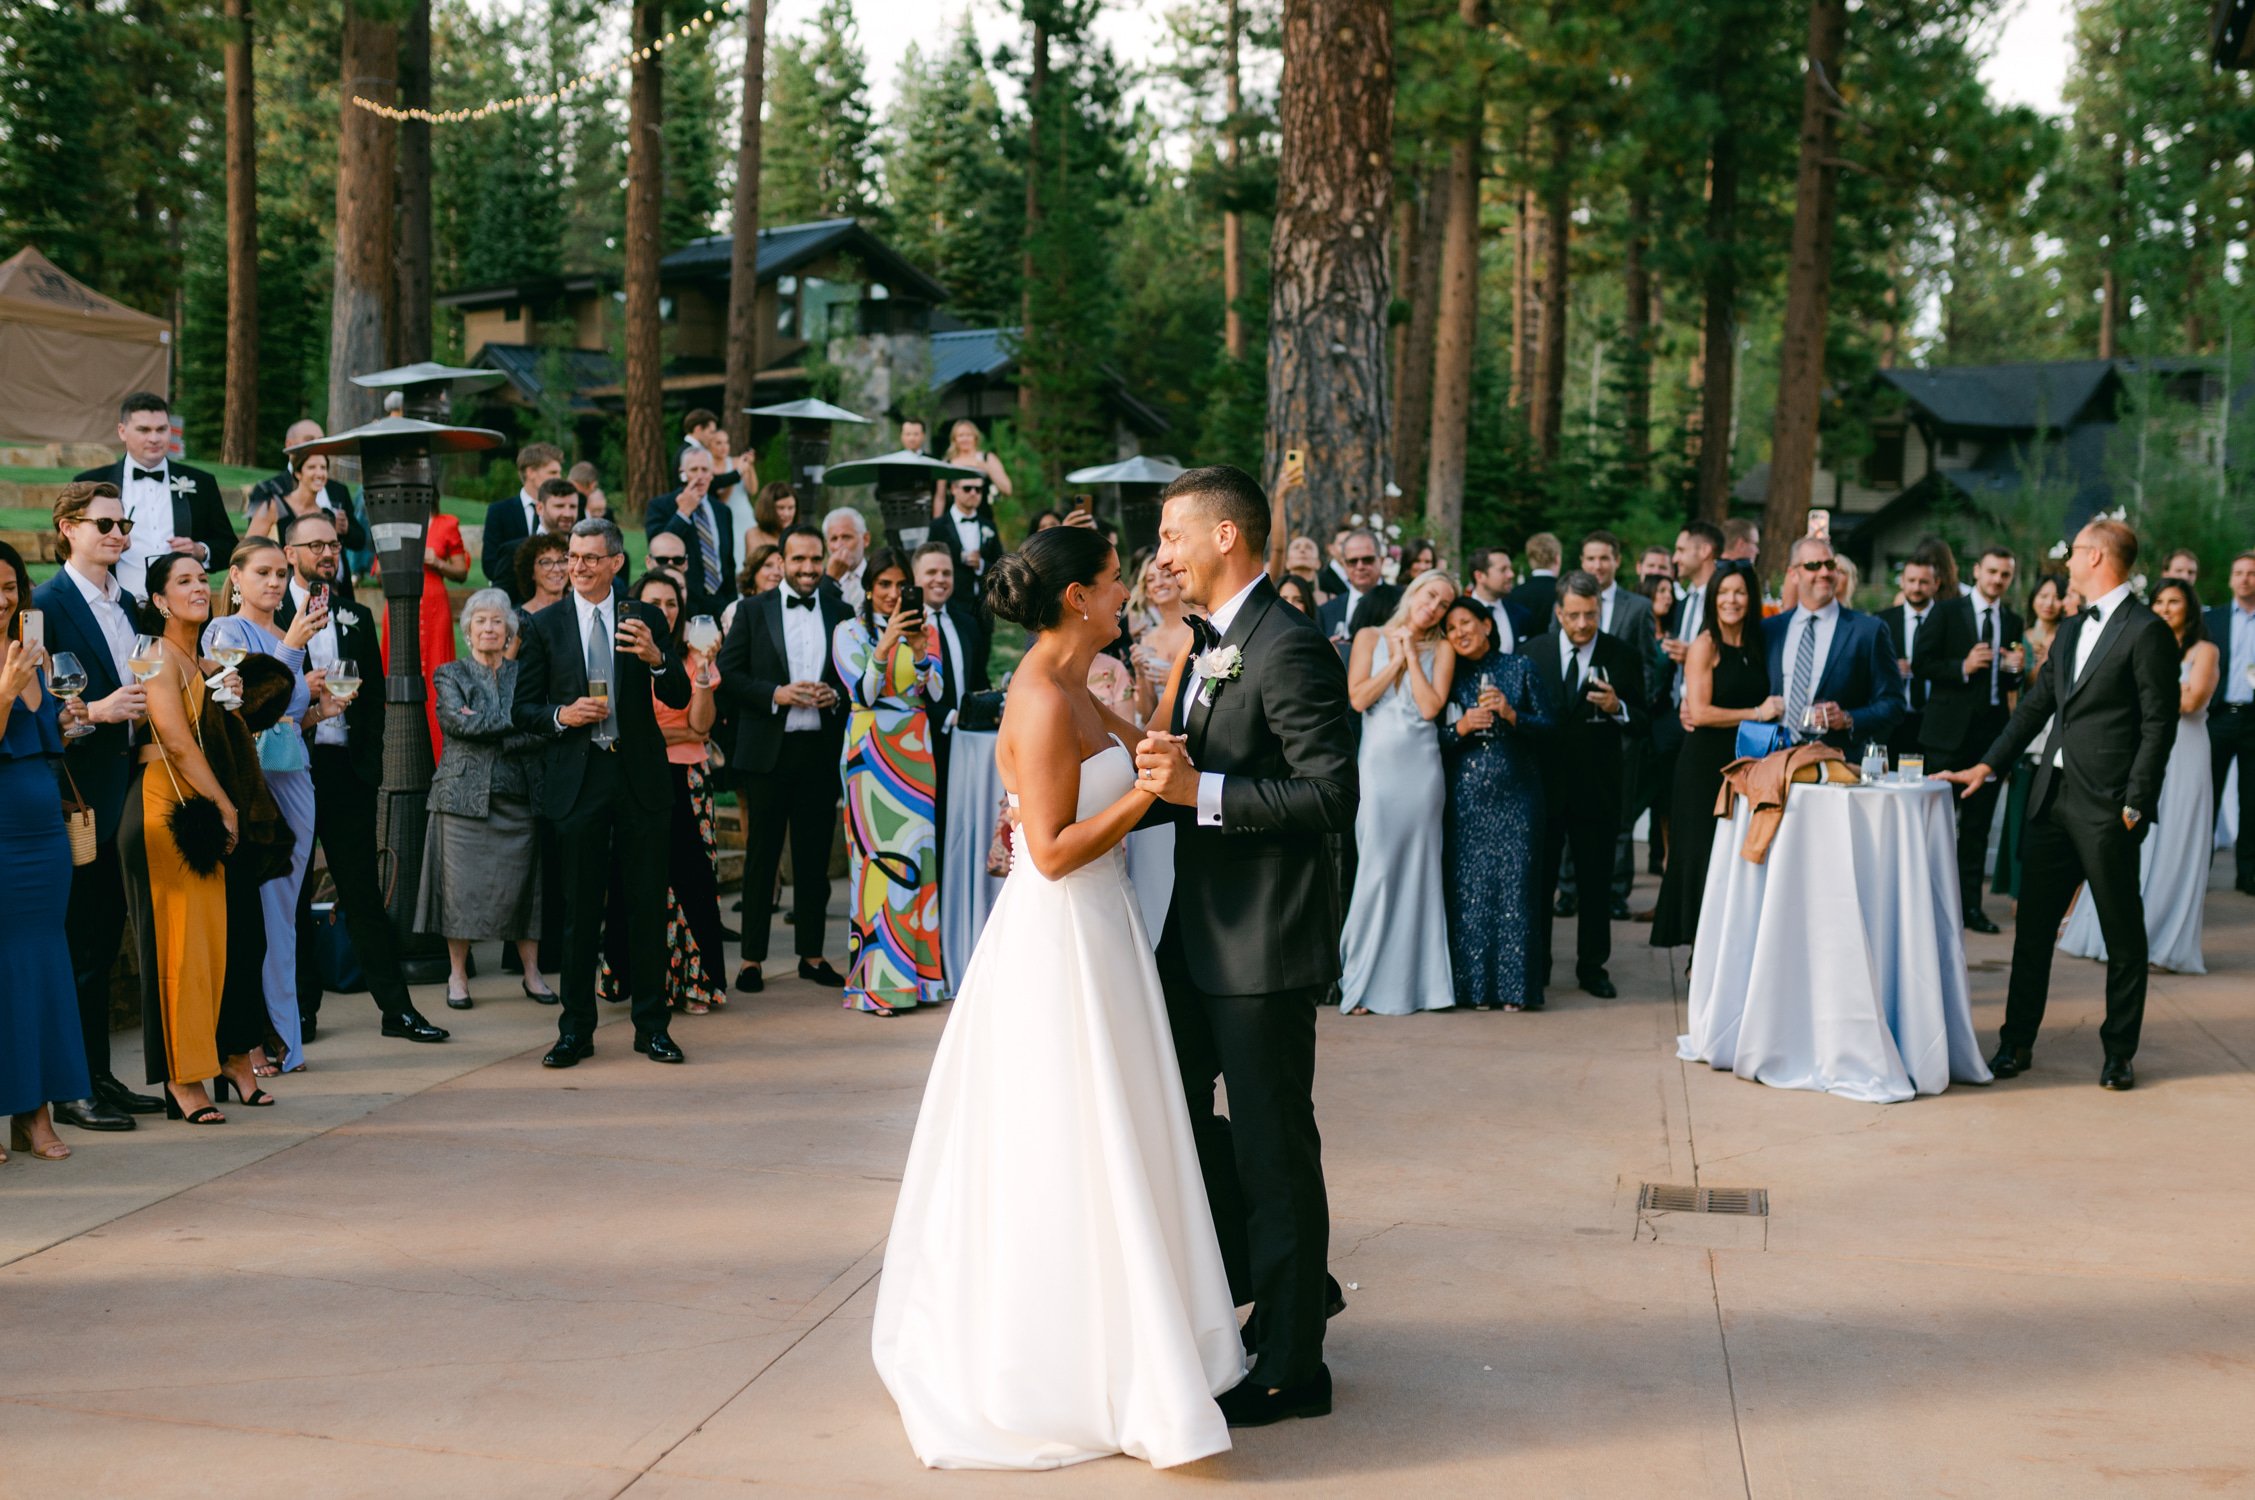 Martis Camp Wedding, photo of the newlywed couple doing their first dance in front of their guests